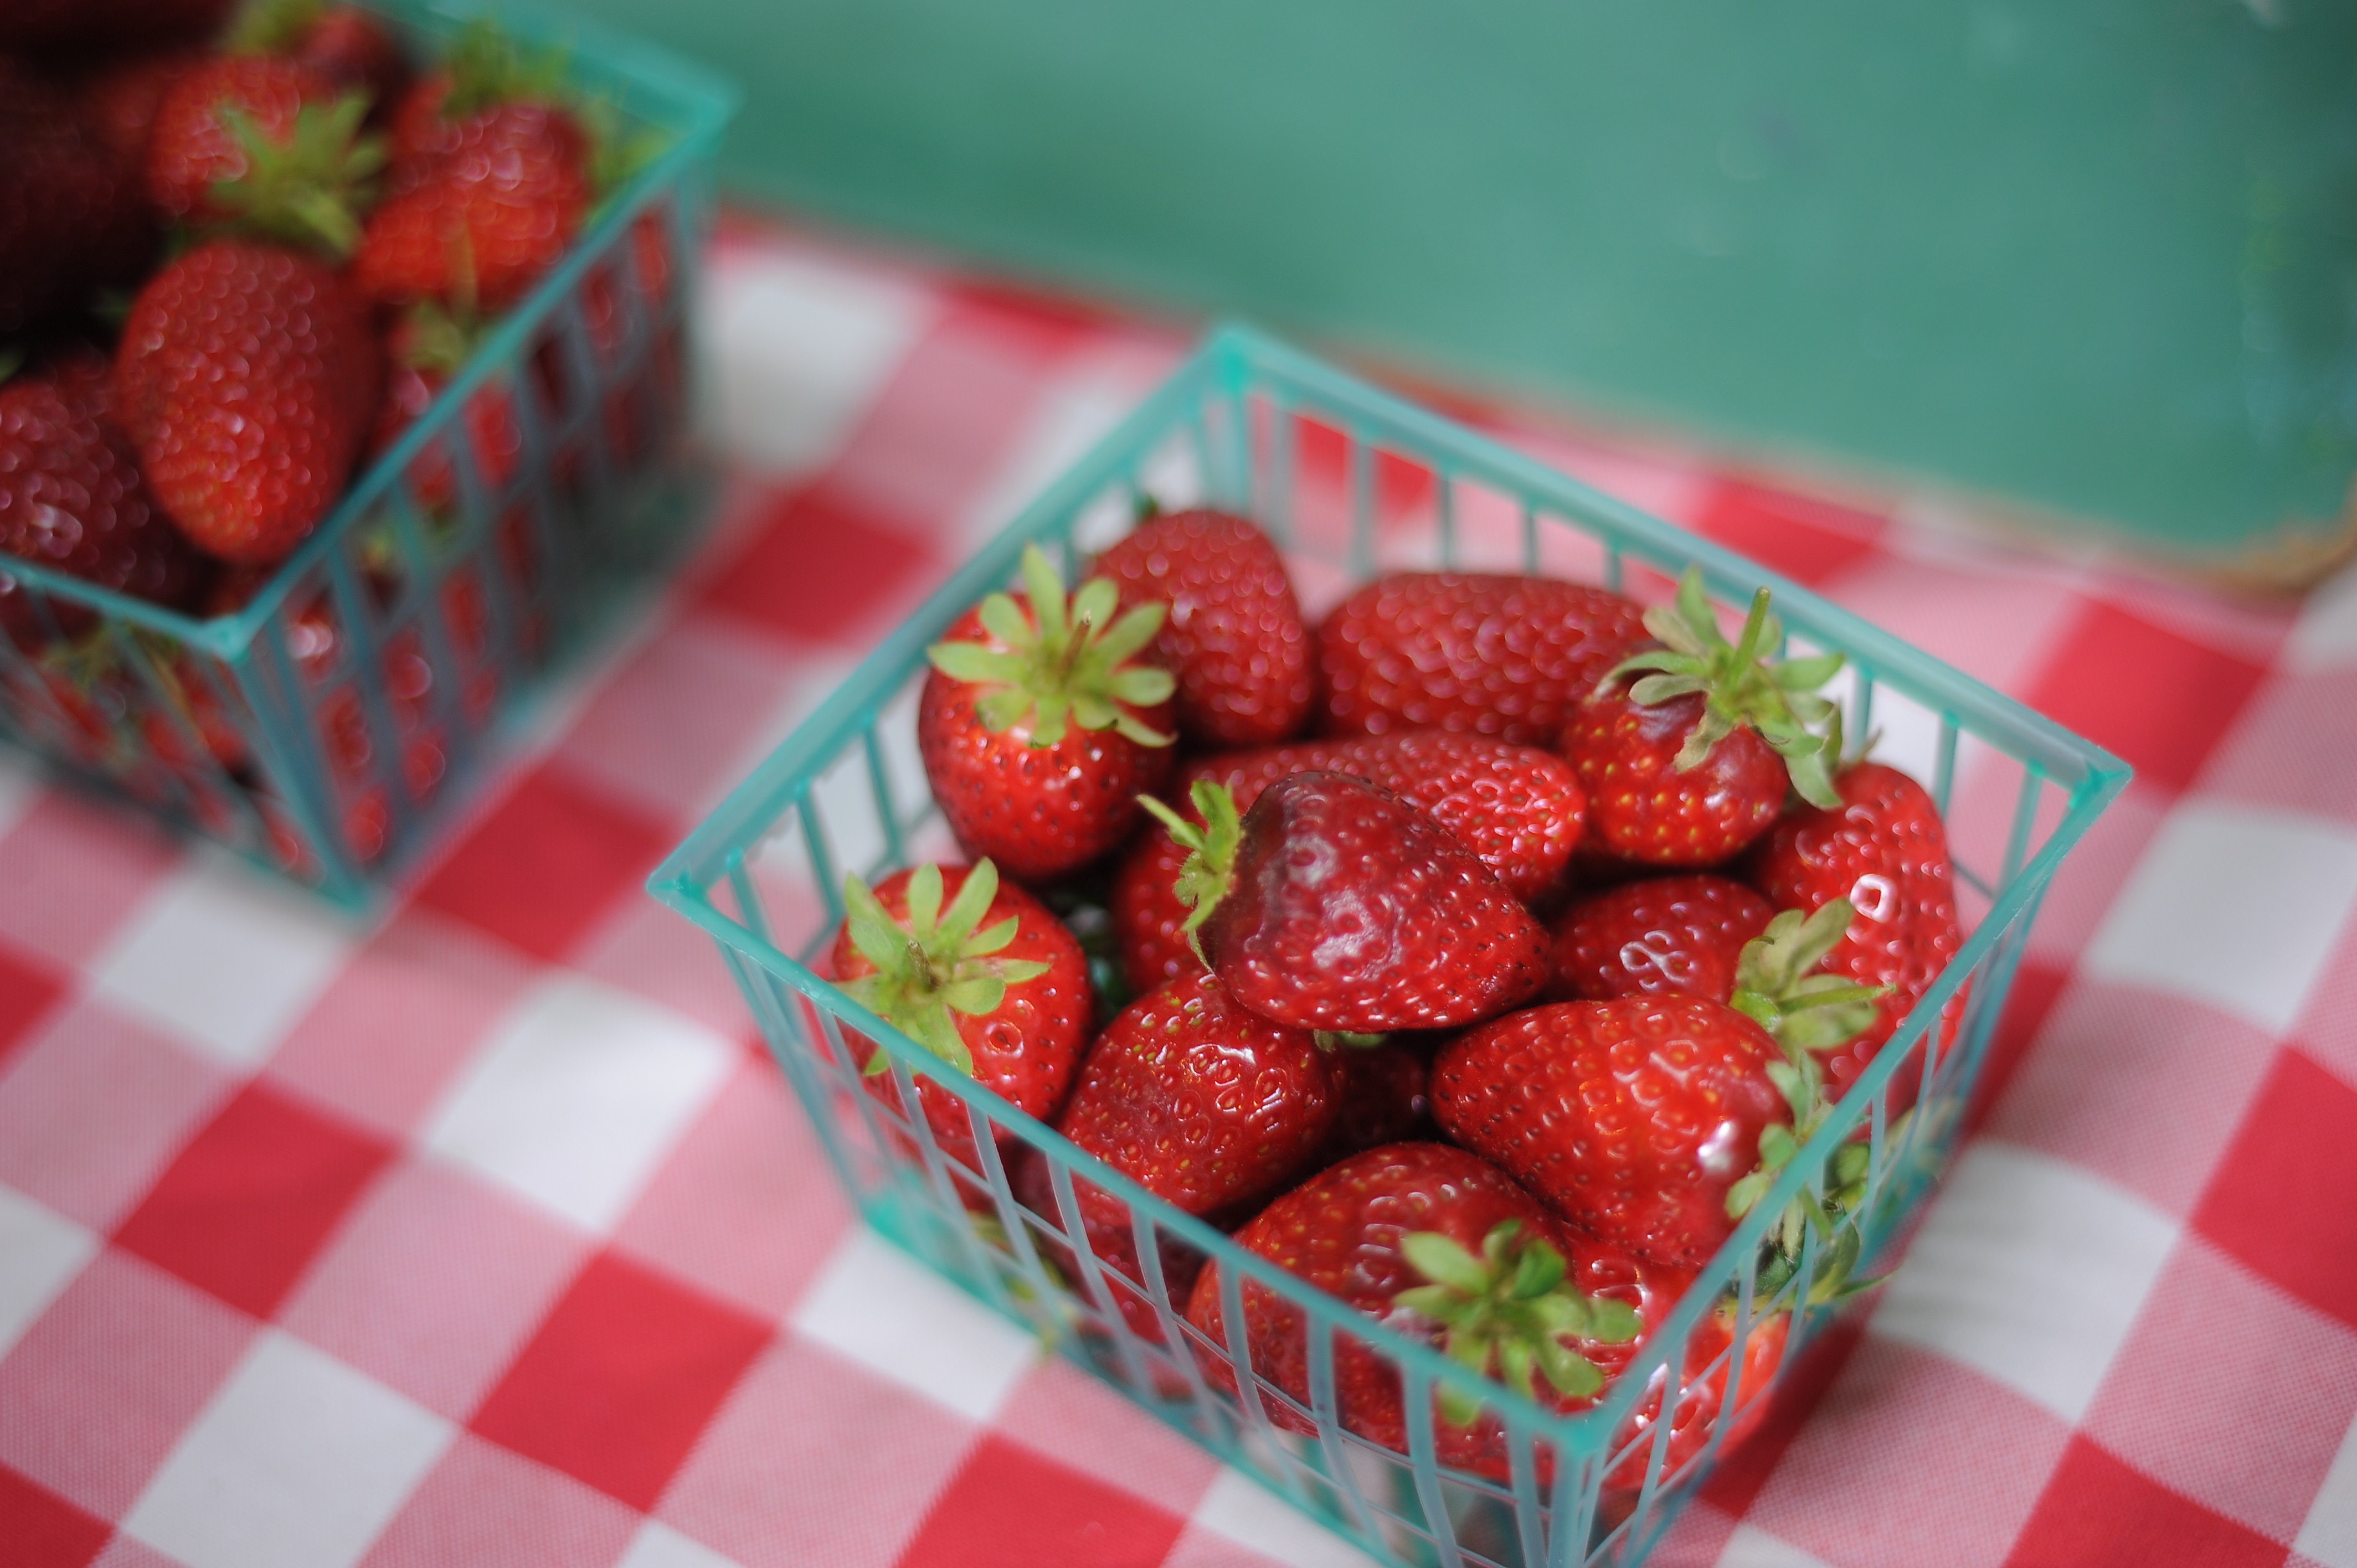 Strawberries at Pie Ranch's farm stand